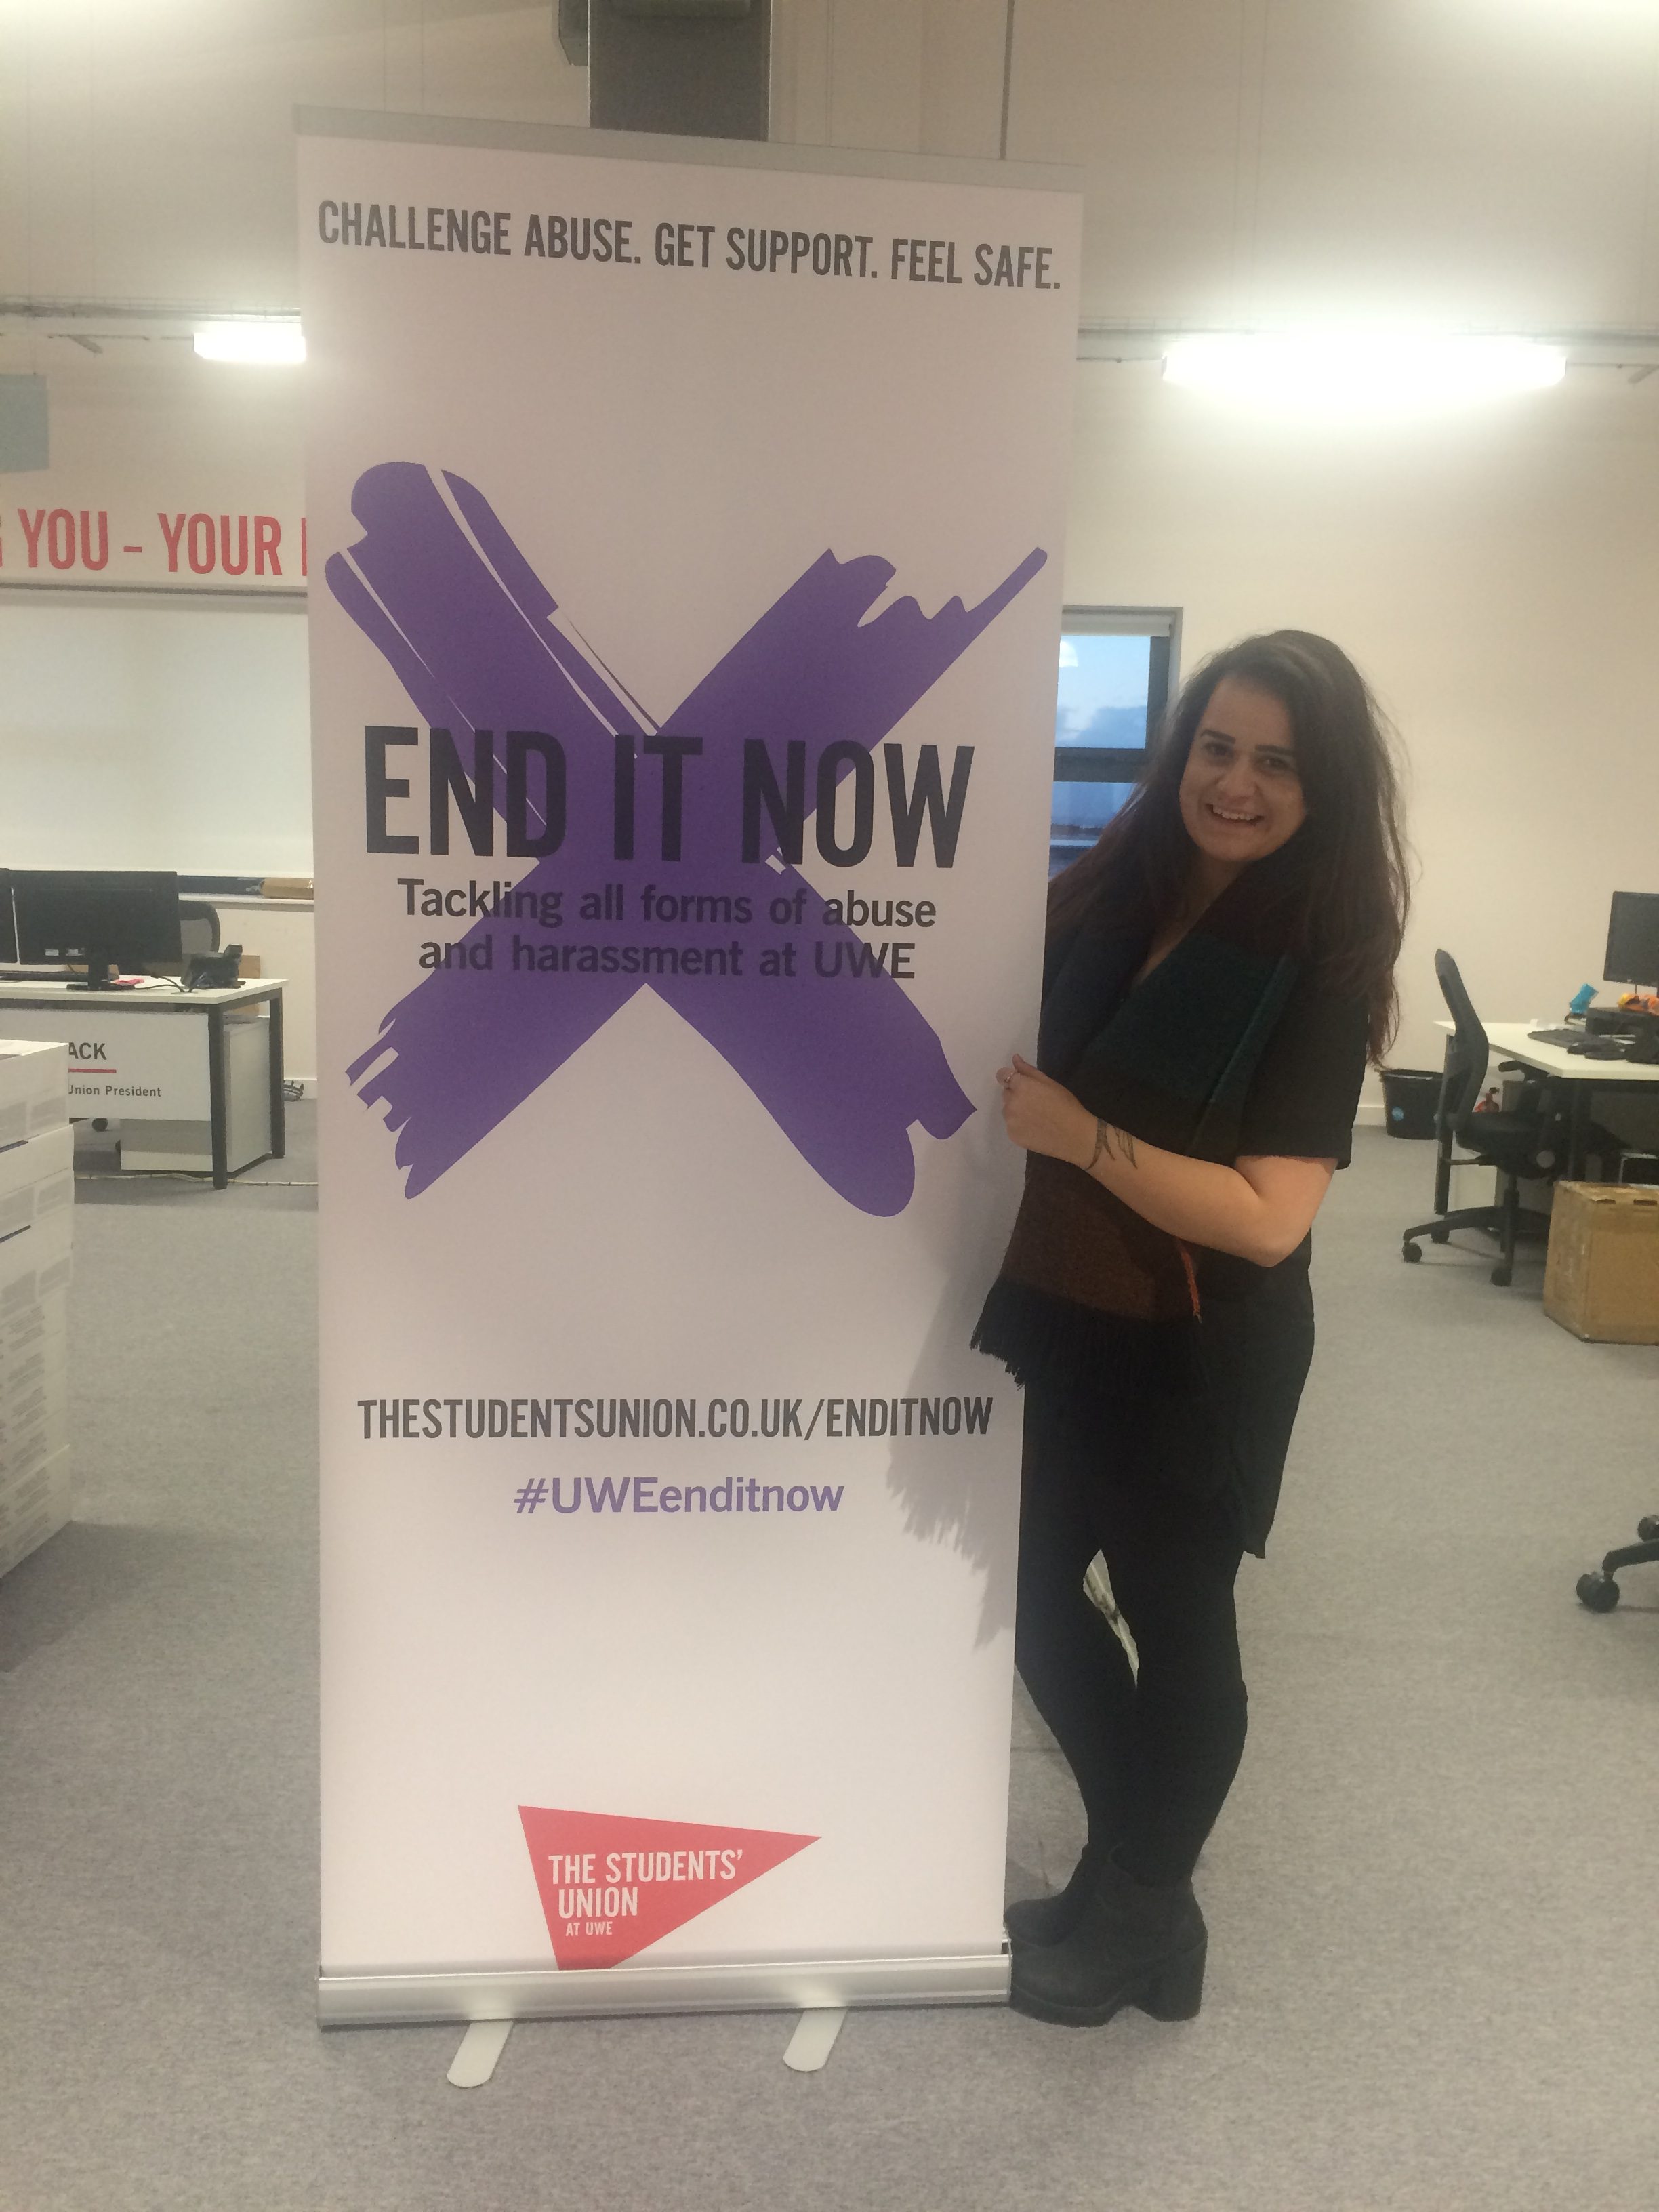 Ruth at End It Now event, A global campaign to raise awareness and advocate for the end of violence against women and children [Image credit: Ruth O'Leary]